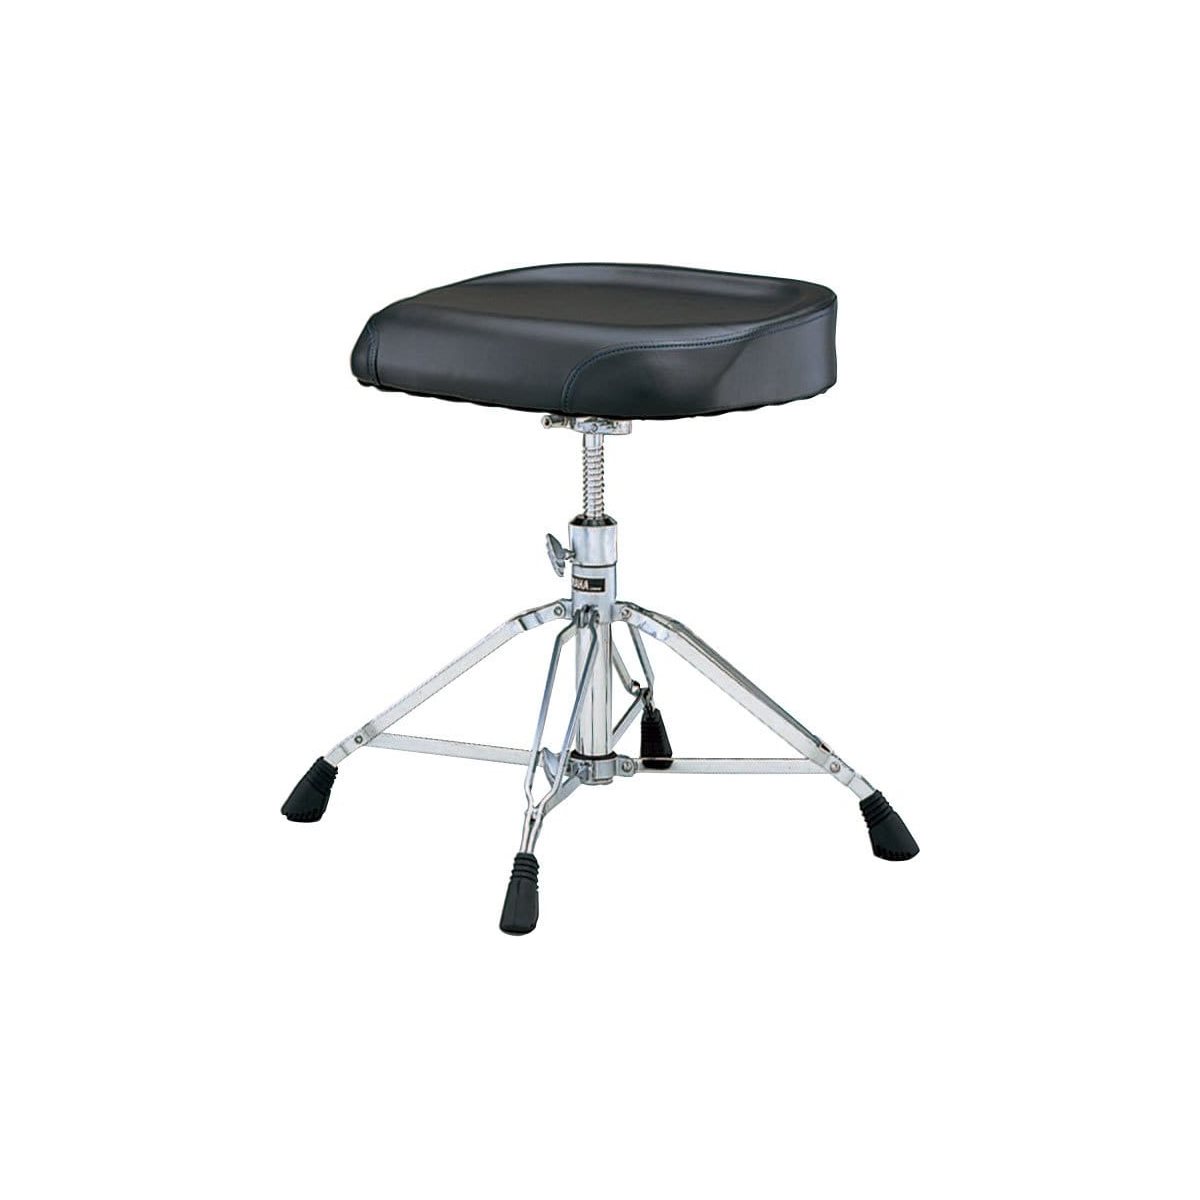 YAMAHA - DS950 - Drum throne bench-style 